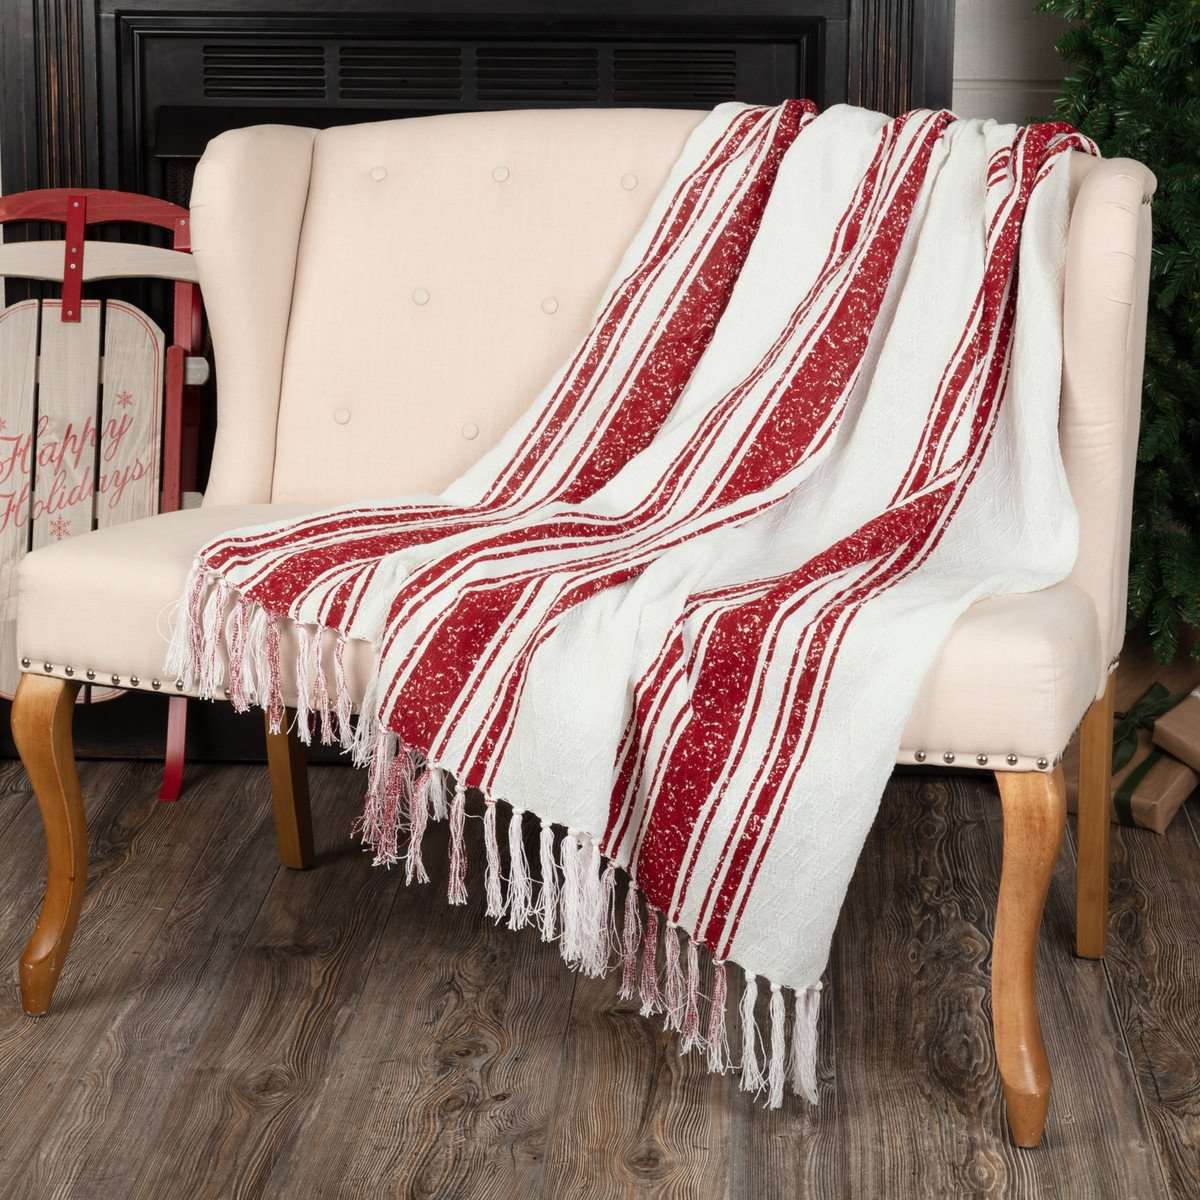 Antique Red Stripe Woven Throw 60" x 50" White, Red VHC Brands - The Fox Decor